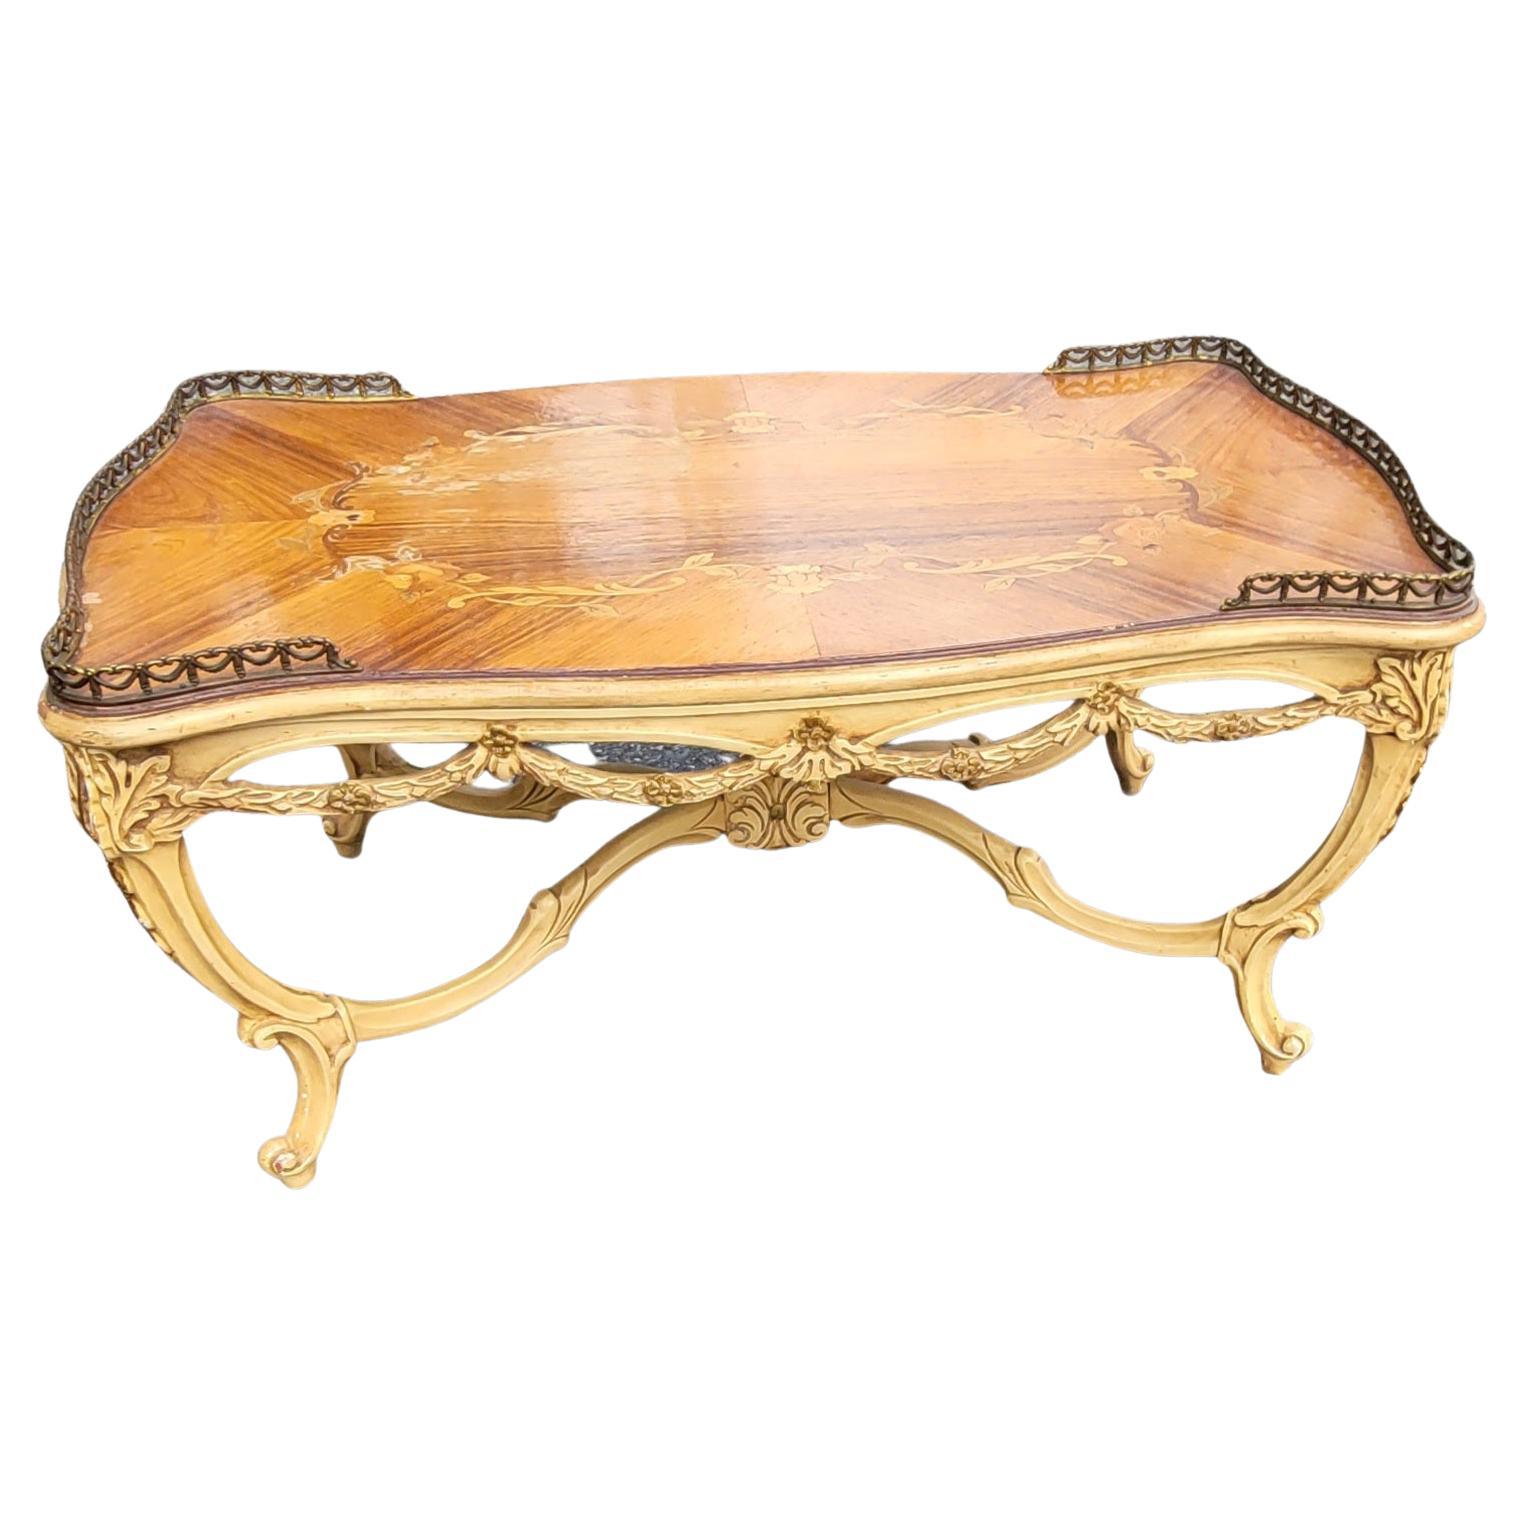 Gorgeous Antique French Louis XV coffee table, from the 1910s. This table is made of walnut wood and kingwood, featuring satinwood floral inlay top with carved galley , Carved wood frame supported by four carved sturdy legs joined together with a